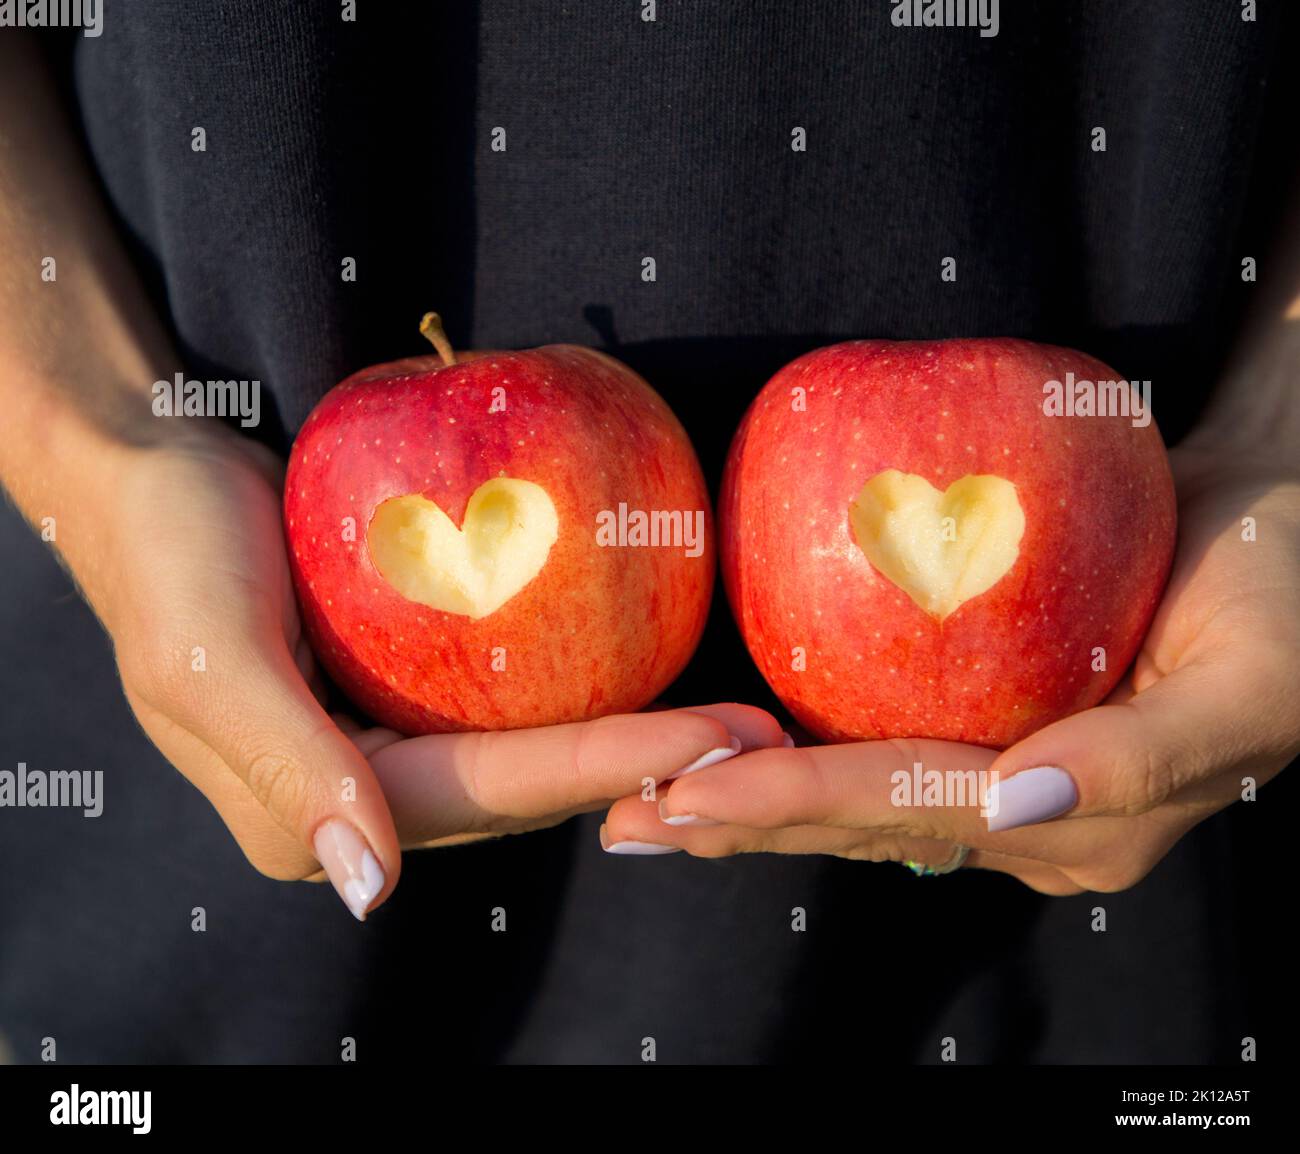 female hands hold two large red apples with hearts cut out on them on dark background. Delicious harvest, healthy diet food, vitamins, organic apples. Stock Photo